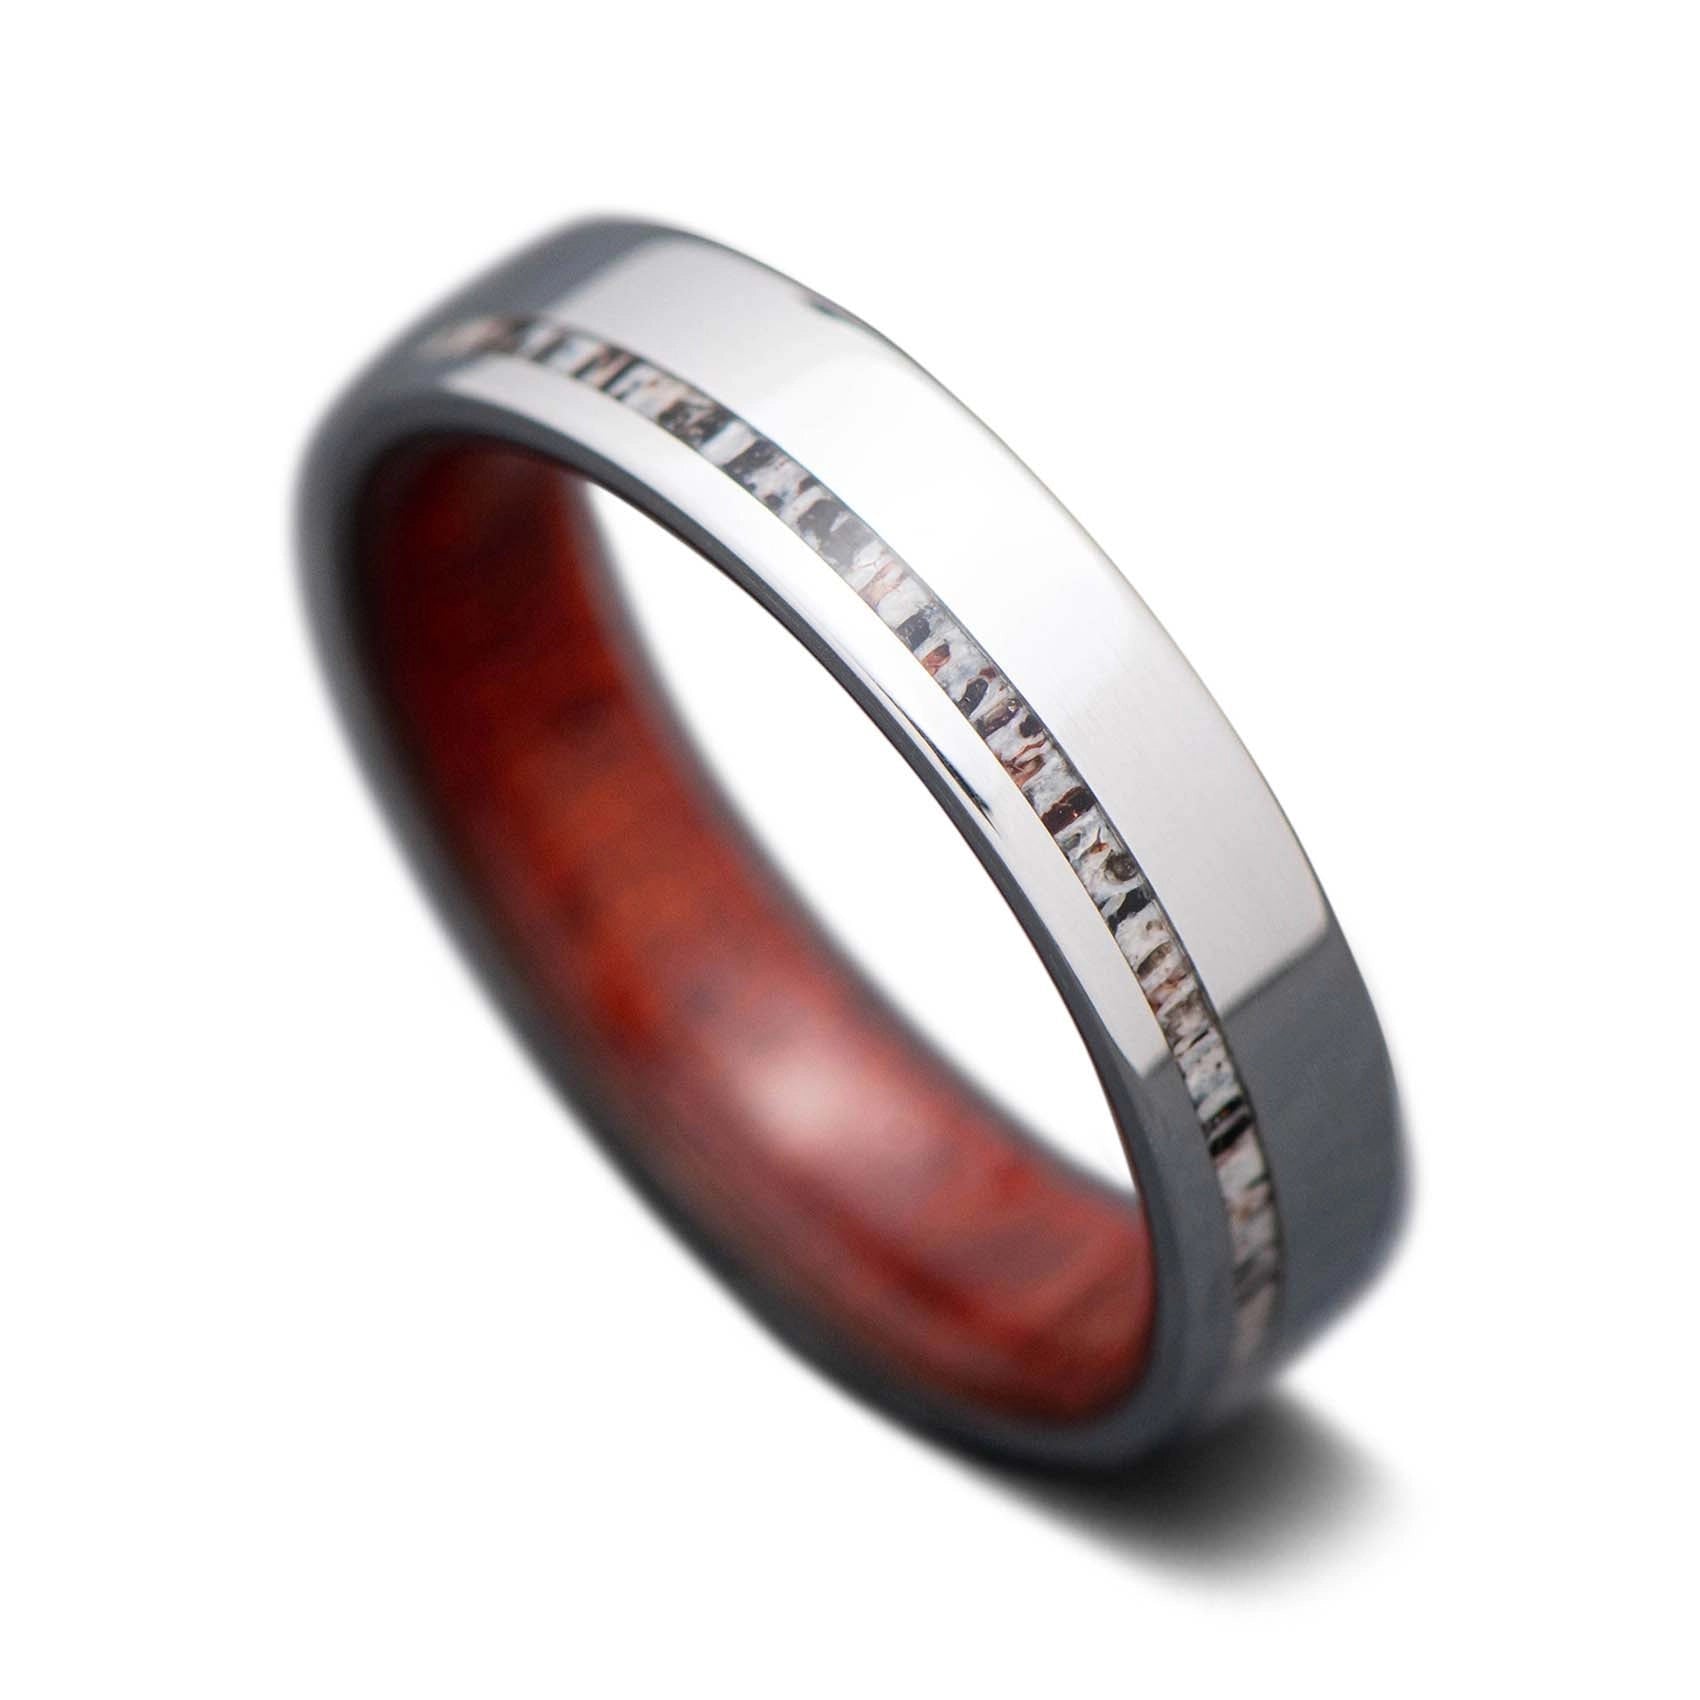 Titanium Core Ring with Deer Antler inlay and Bloodwood inner sleeve, 5mm -THE SHIFT